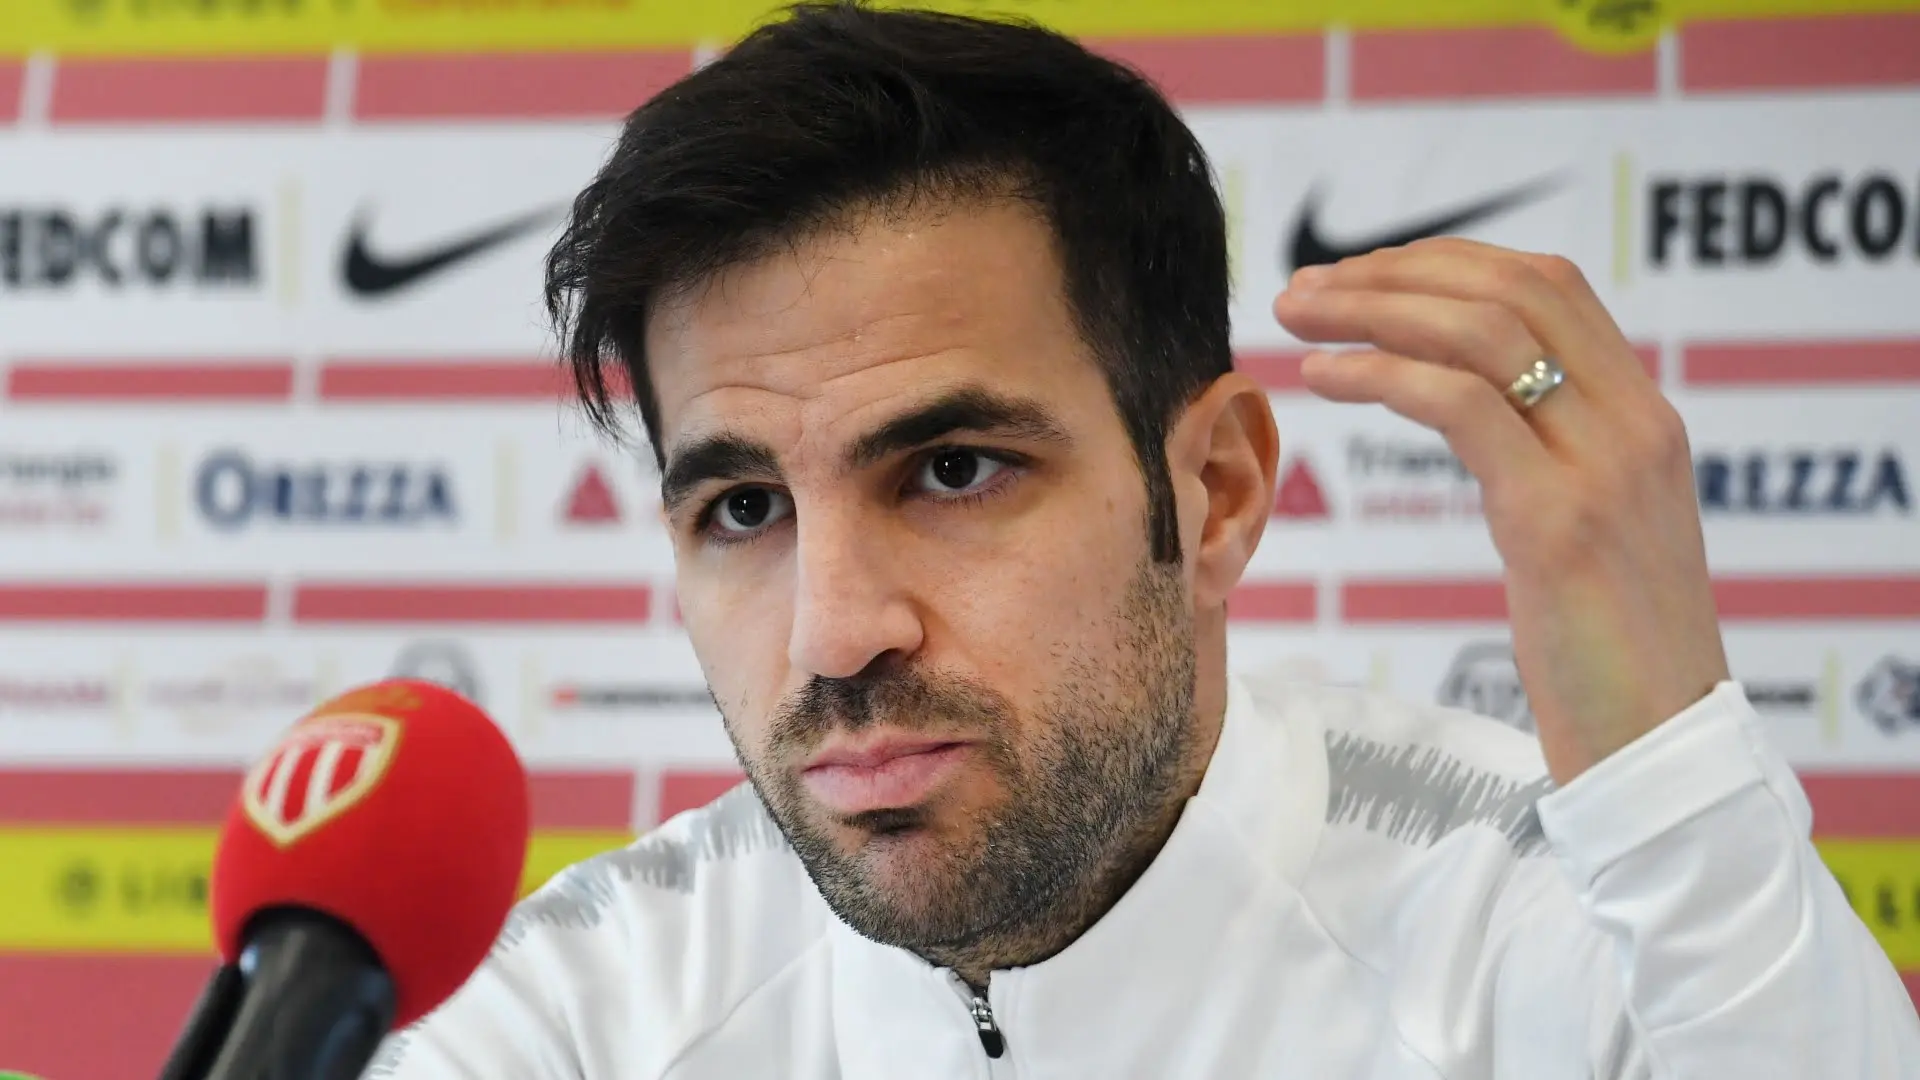 EPL: I don't understand his game plan - Fabregas punches Manchester United coach